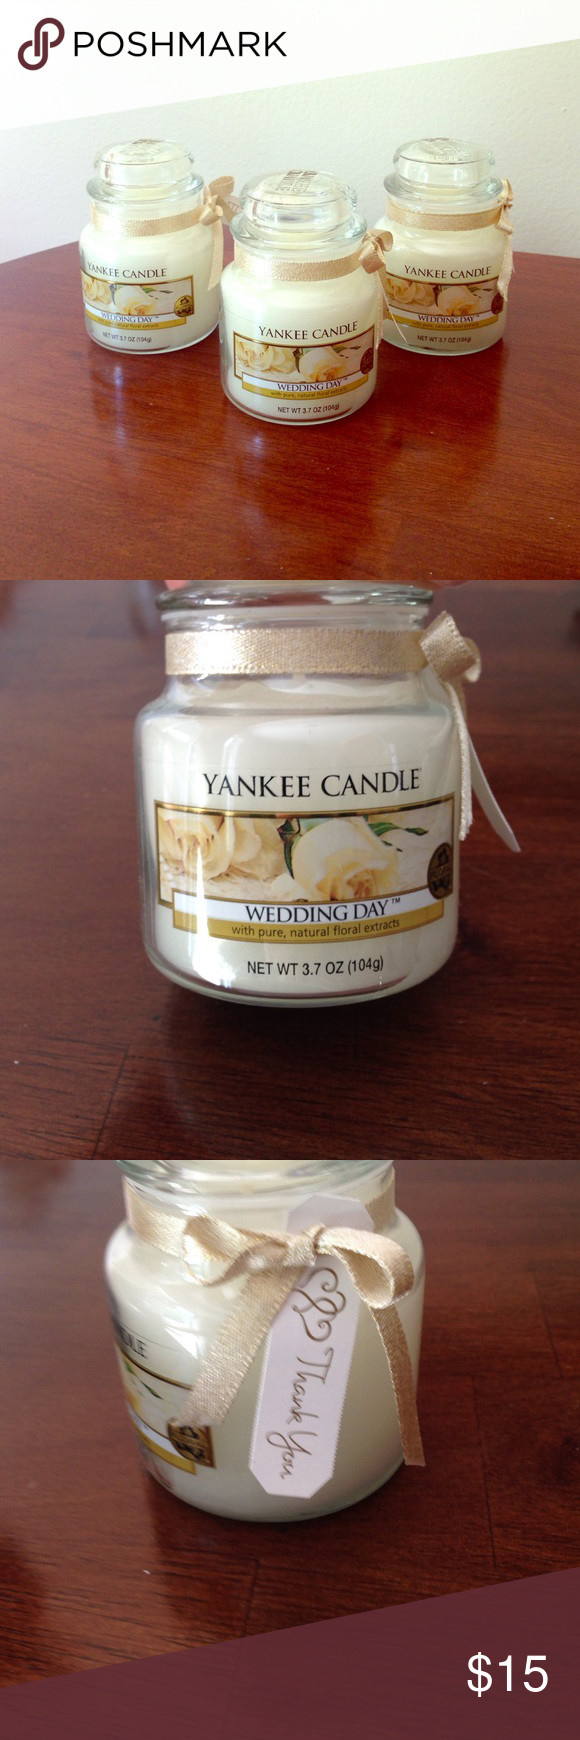 Yankee Candle Wedding Favors
 8 Yankee Candle Wedding Day Candles 3 7 oz NWT